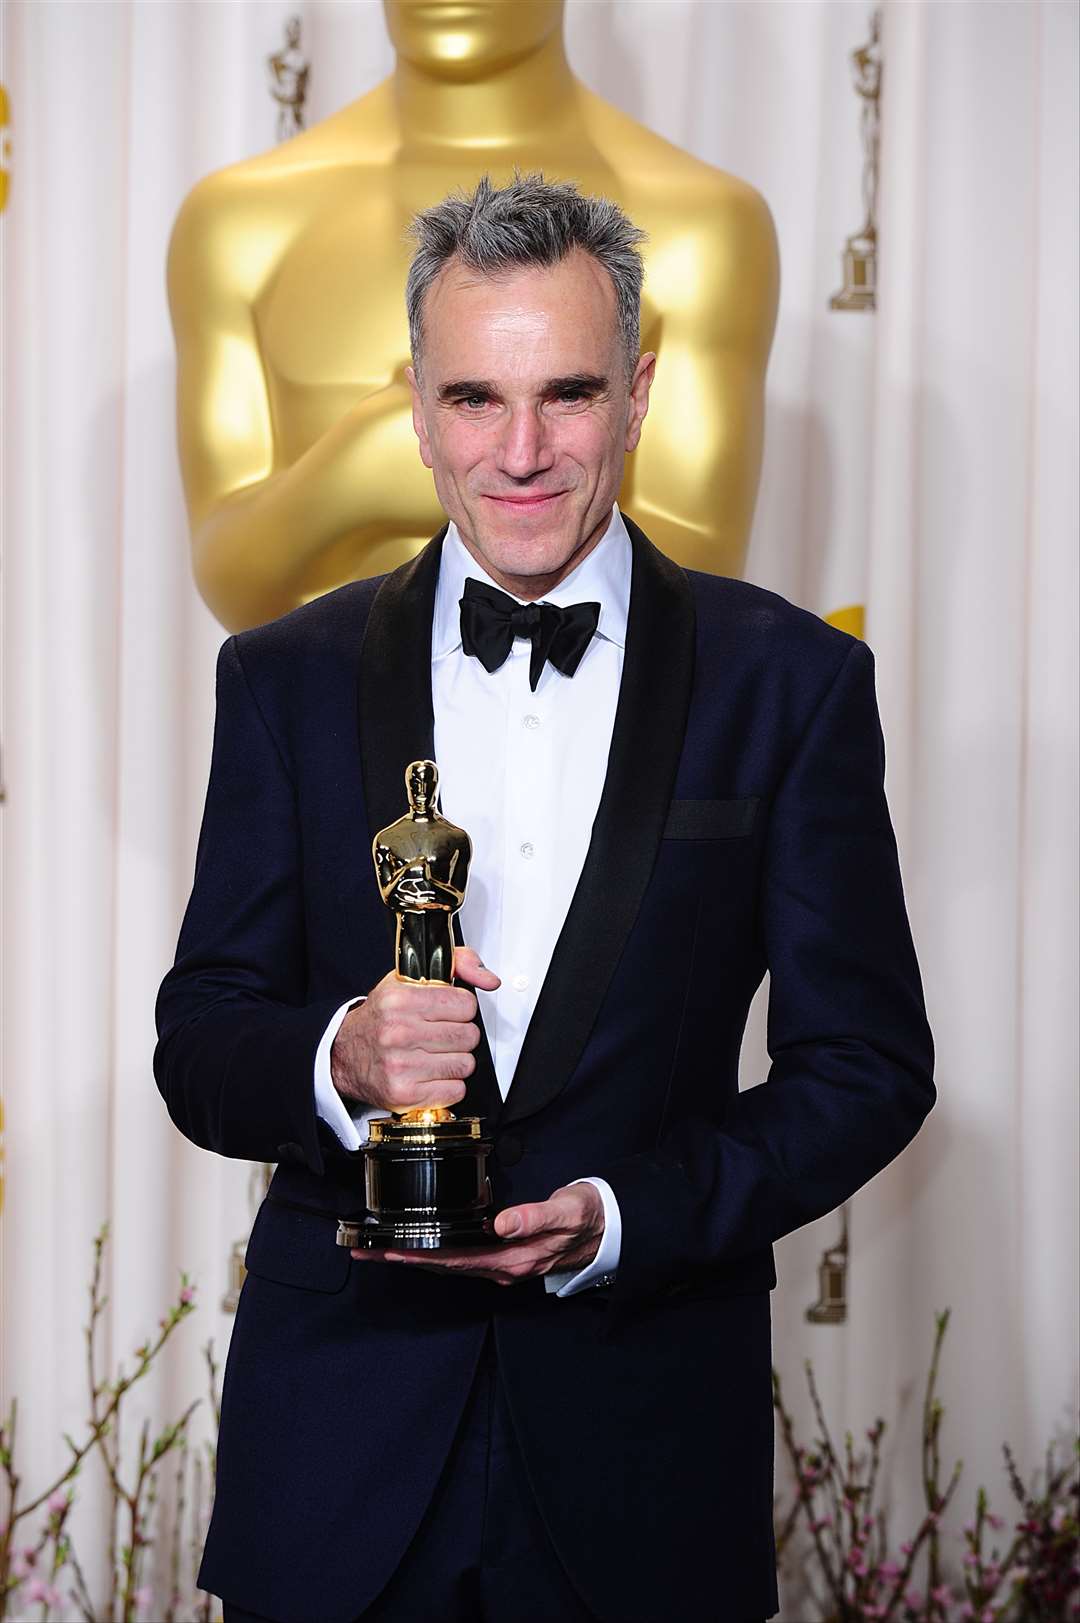 Daniel Day-Lewis with his Oscar for best actor received for his role in Lincoln (Ian West/PA)